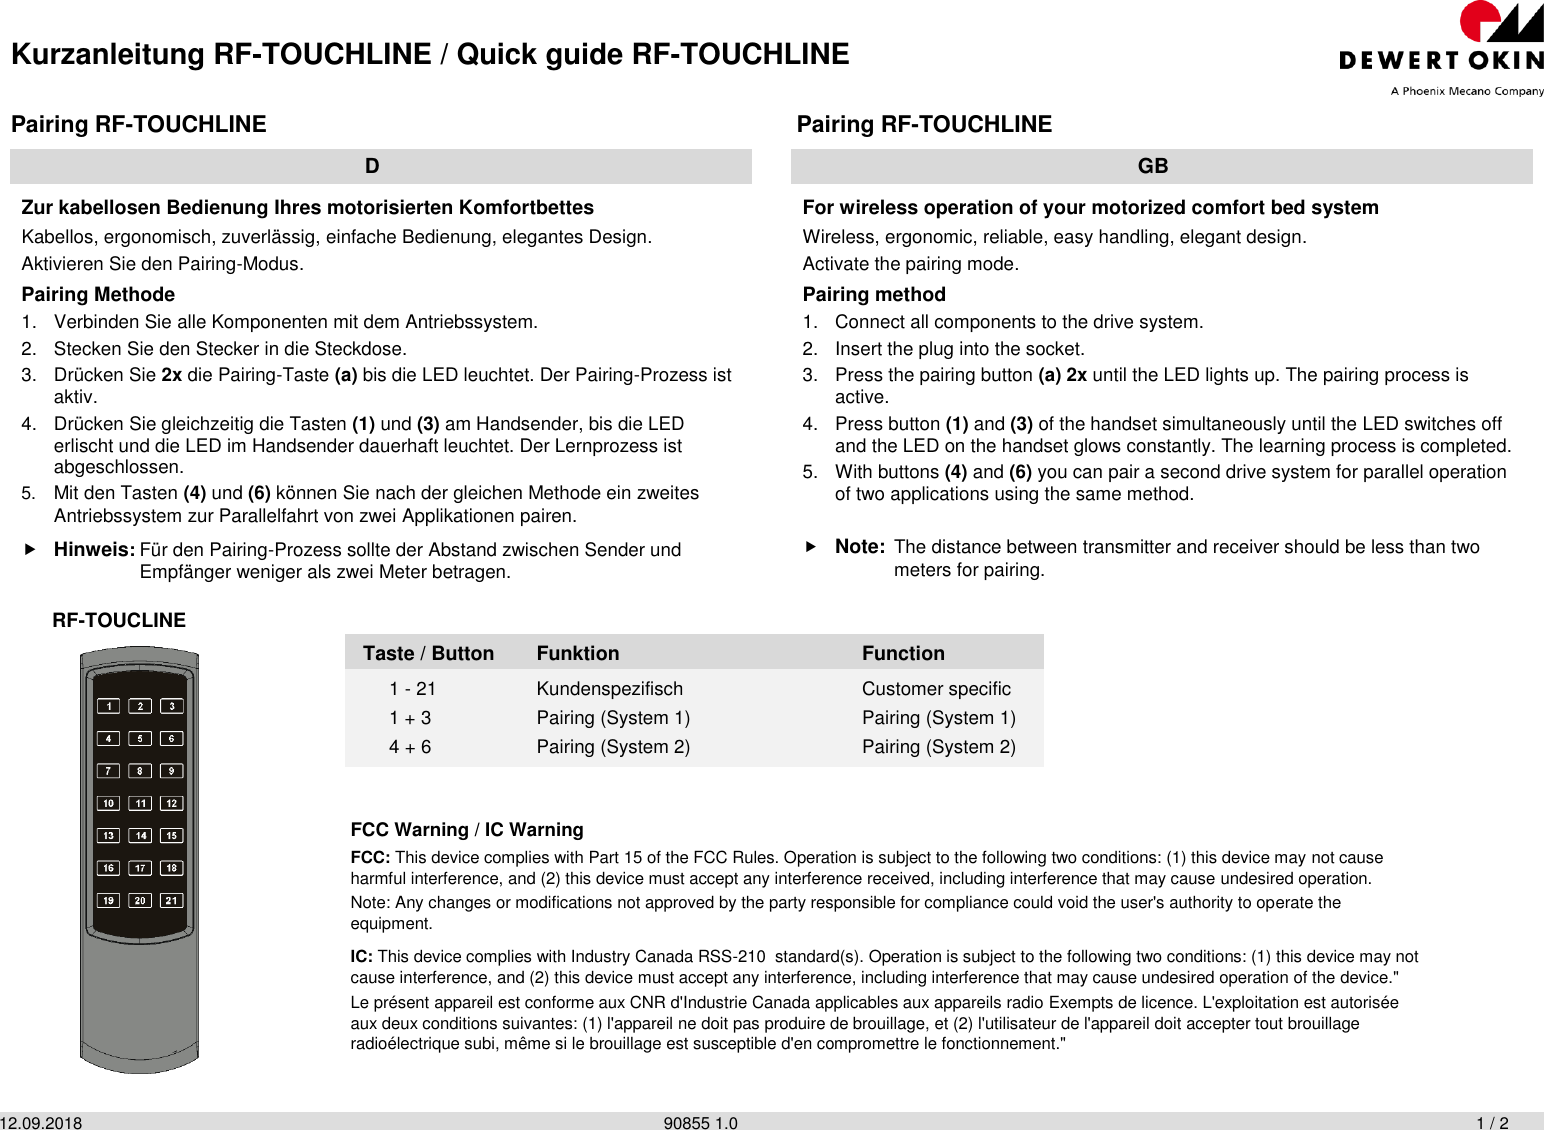 Kurzanleitung RF-TOUCHLINE / Quick guide RF-TOUCHLINE 12.09.2018                90855 1.0                    1 / 2  Pairing RF-TOUCHLINE  Pairing RF-TOUCHLINE  D  GB Zur kabellosen Bedienung Ihres motorisierten Komfortbettes Kabellos, ergonomisch, zuverlässig, einfache Bedienung, elegantes Design. Aktivieren Sie den Pairing-Modus. Pairing Methode 1.  Verbinden Sie alle Komponenten mit dem Antriebssystem. 2.  Stecken Sie den Stecker in die Steckdose. 3.  Drücken Sie 2x die Pairing-Taste (a) bis die LED leuchtet. Der Pairing-Prozess ist aktiv. 4.  Drücken Sie gleichzeitig die Tasten (1) und (3) am Handsender, bis die LED erlischt und die LED im Handsender dauerhaft leuchtet. Der Lernprozess ist abgeschlossen. 5. Mit den Tasten (4) und (6) können Sie nach der gleichen Methode ein zweites Antriebssystem zur Parallelfahrt von zwei Applikationen pairen.  Hinweis: Für den Pairing-Prozess sollte der Abstand zwischen Sender und   Empfänger weniger als zwei Meter betragen. For wireless operation of your motorized comfort bed system Wireless, ergonomic, reliable, easy handling, elegant design. Activate the pairing mode. Pairing method 1.  Connect all components to the drive system. 2.  Insert the plug into the socket. 3.  Press the pairing button (a) 2x until the LED lights up. The pairing process is active. 4.  Press button (1) and (3) of the handset simultaneously until the LED switches off and the LED on the handset glows constantly. The learning process is completed. 5.  With buttons (4) and (6) you can pair a second drive system for parallel operation of two applications using the same method.  Note: The distance between transmitter and receiver should be less than two   meters for pairing. RF-TOUCLINE  Taste / Button Funktion  Function 1 - 21  Kundenspezifisch  Customer specific 1 + 3  Pairing (System 1)  Pairing (System 1) 4 + 6  Pairing (System 2)  Pairing (System 2) FCC Warning / IC Warning FCC: This device complies with Part 15 of the FCC Rules. Operation is subject to the following two conditions: (1) this device may not cause harmful interference, and (2) this device must accept any interference received, including interference that may cause undesired operation. Note: Any changes or modifications not approved by the party responsible for compliance could void the user&apos;s authority to operate the equipment. IC: This device complies with Industry Canada RSS-210  standard(s). Operation is subject to the following two conditions: (1) this device may not cause interference, and (2) this device must accept any interference, including interference that may cause undesired operation of the device.&quot; Le présent appareil est conforme aux CNR d&apos;Industrie Canada applicables aux appareils radio Exempts de licence. L&apos;exploitation est autorisée aux deux conditions suivantes: (1) l&apos;appareil ne doit pas produire de brouillage, et (2) l&apos;utilisateur de l&apos;appareil doit accepter tout brouillage radioélectrique subi, même si le brouillage est susceptible d&apos;en compromettre le fonctionnement.&quot; 